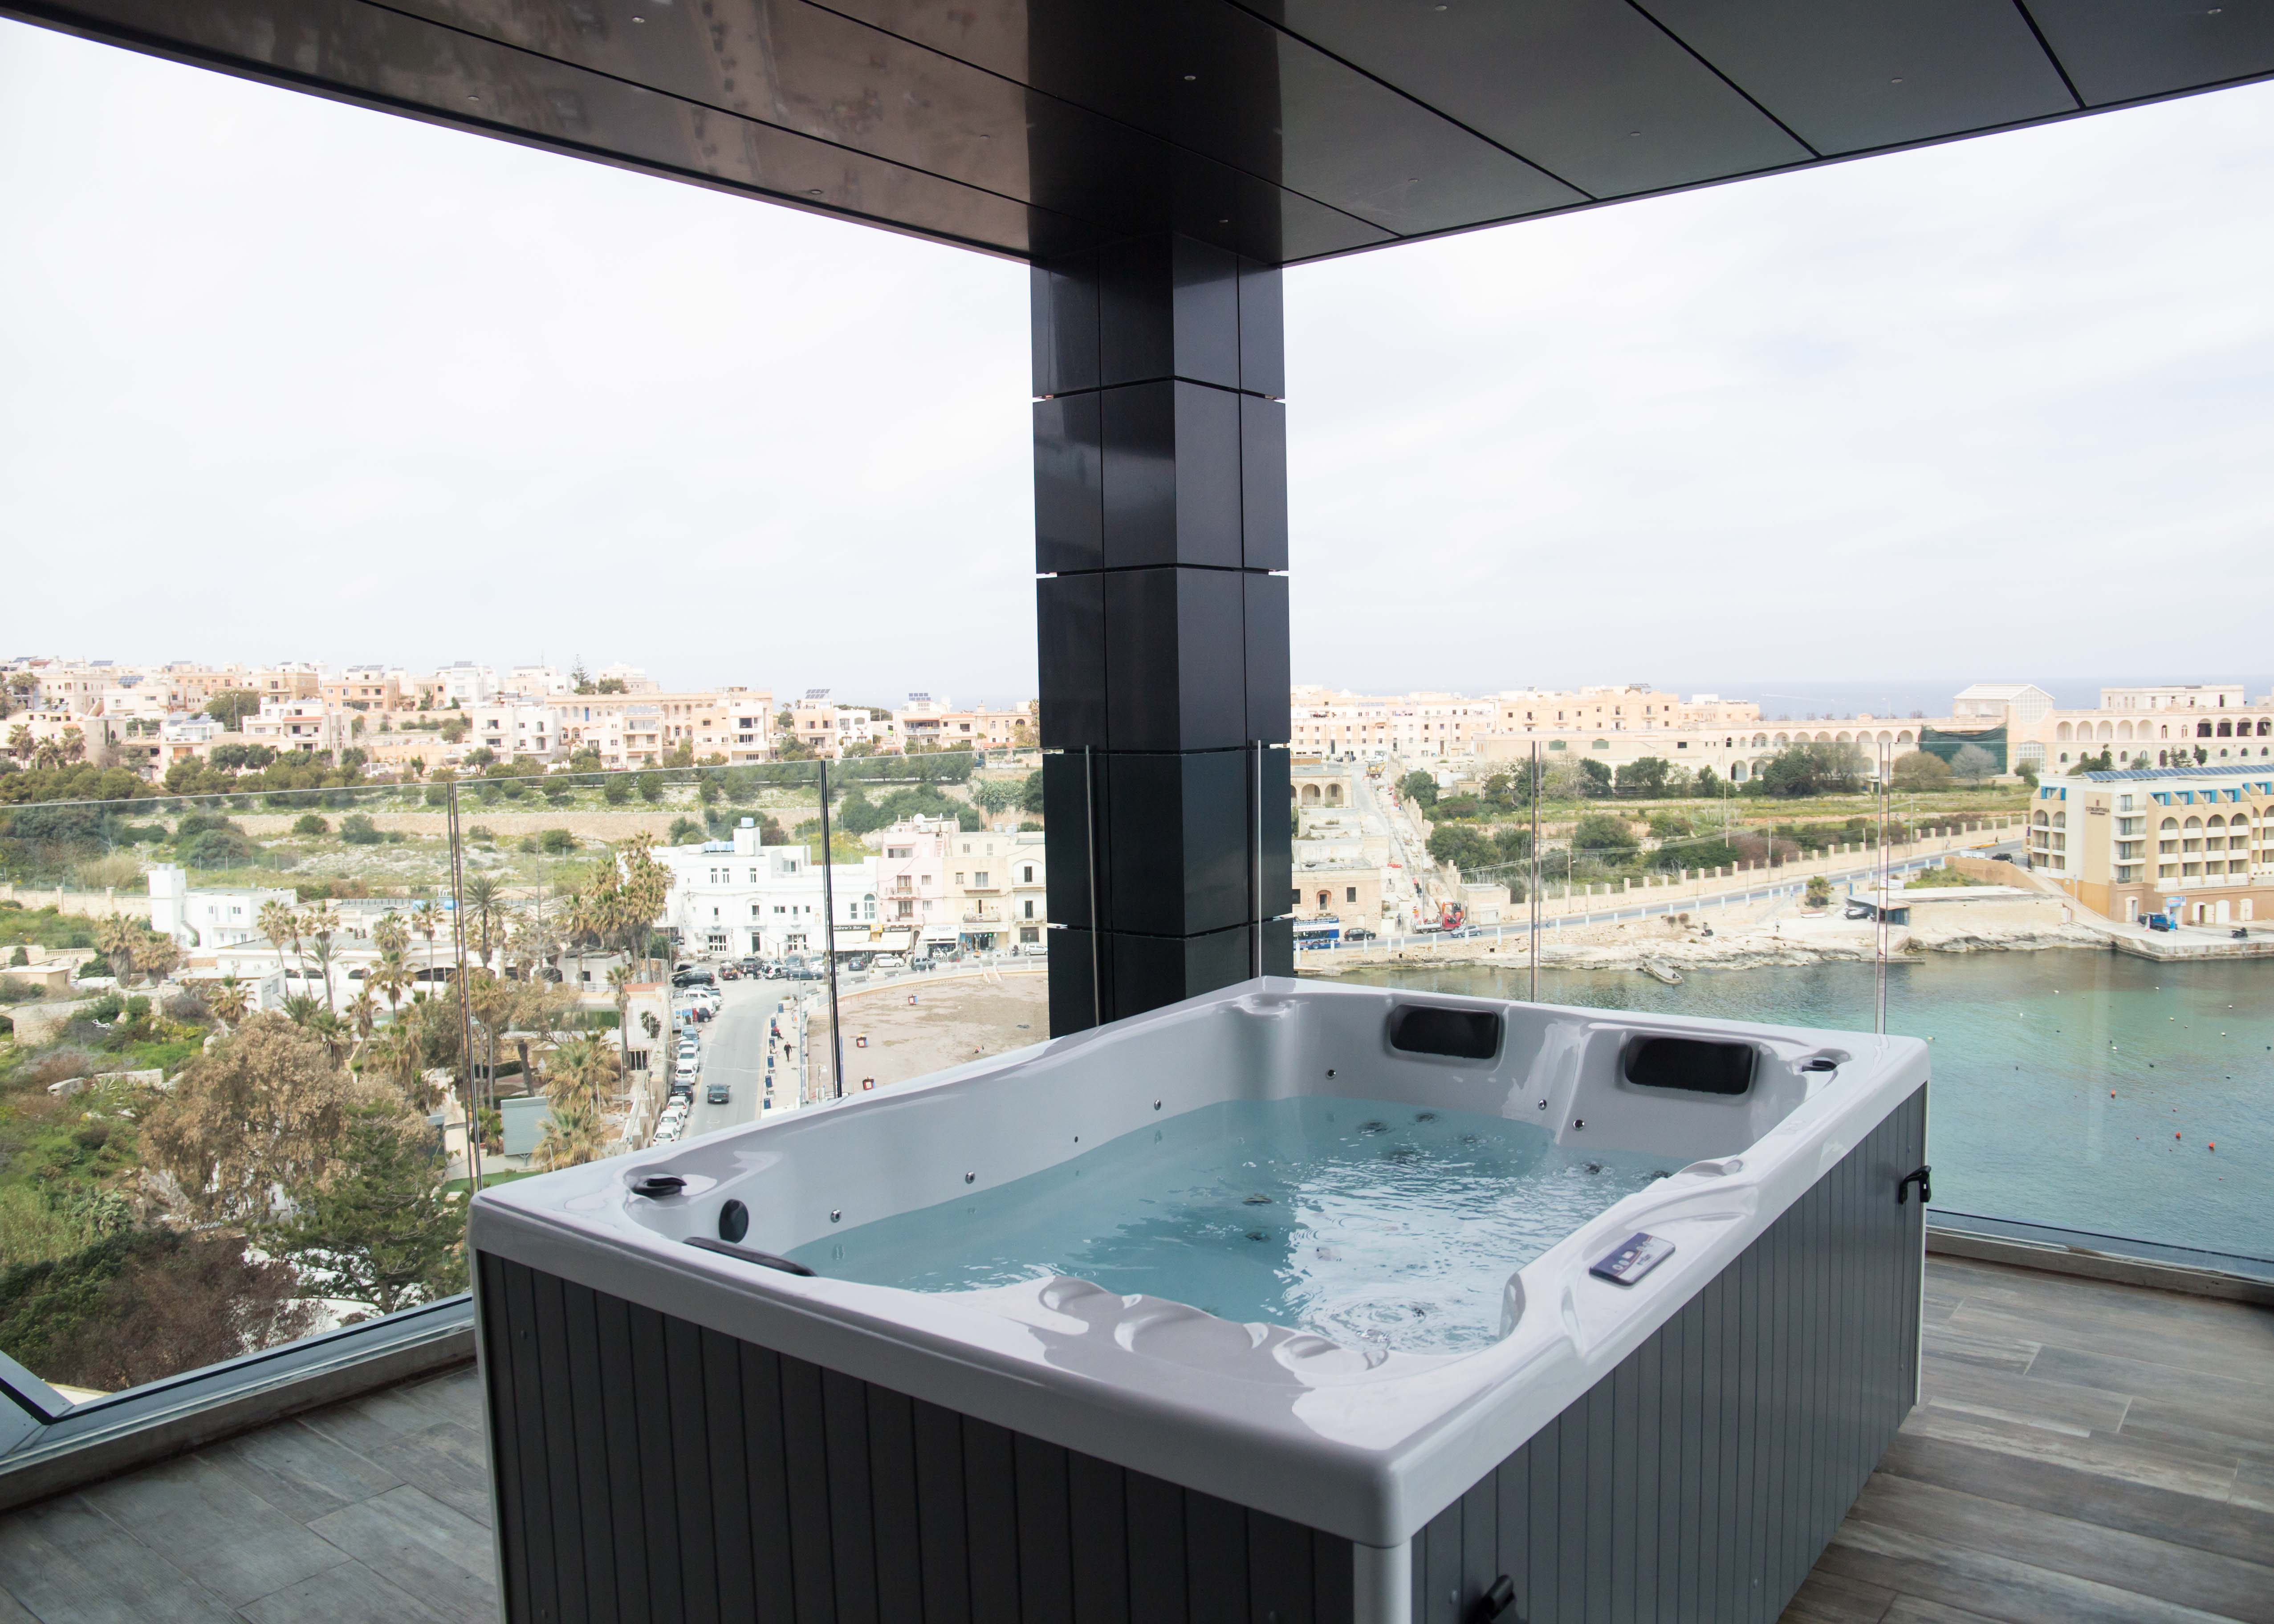 Hotel with jacuzzi facility, H Hotel